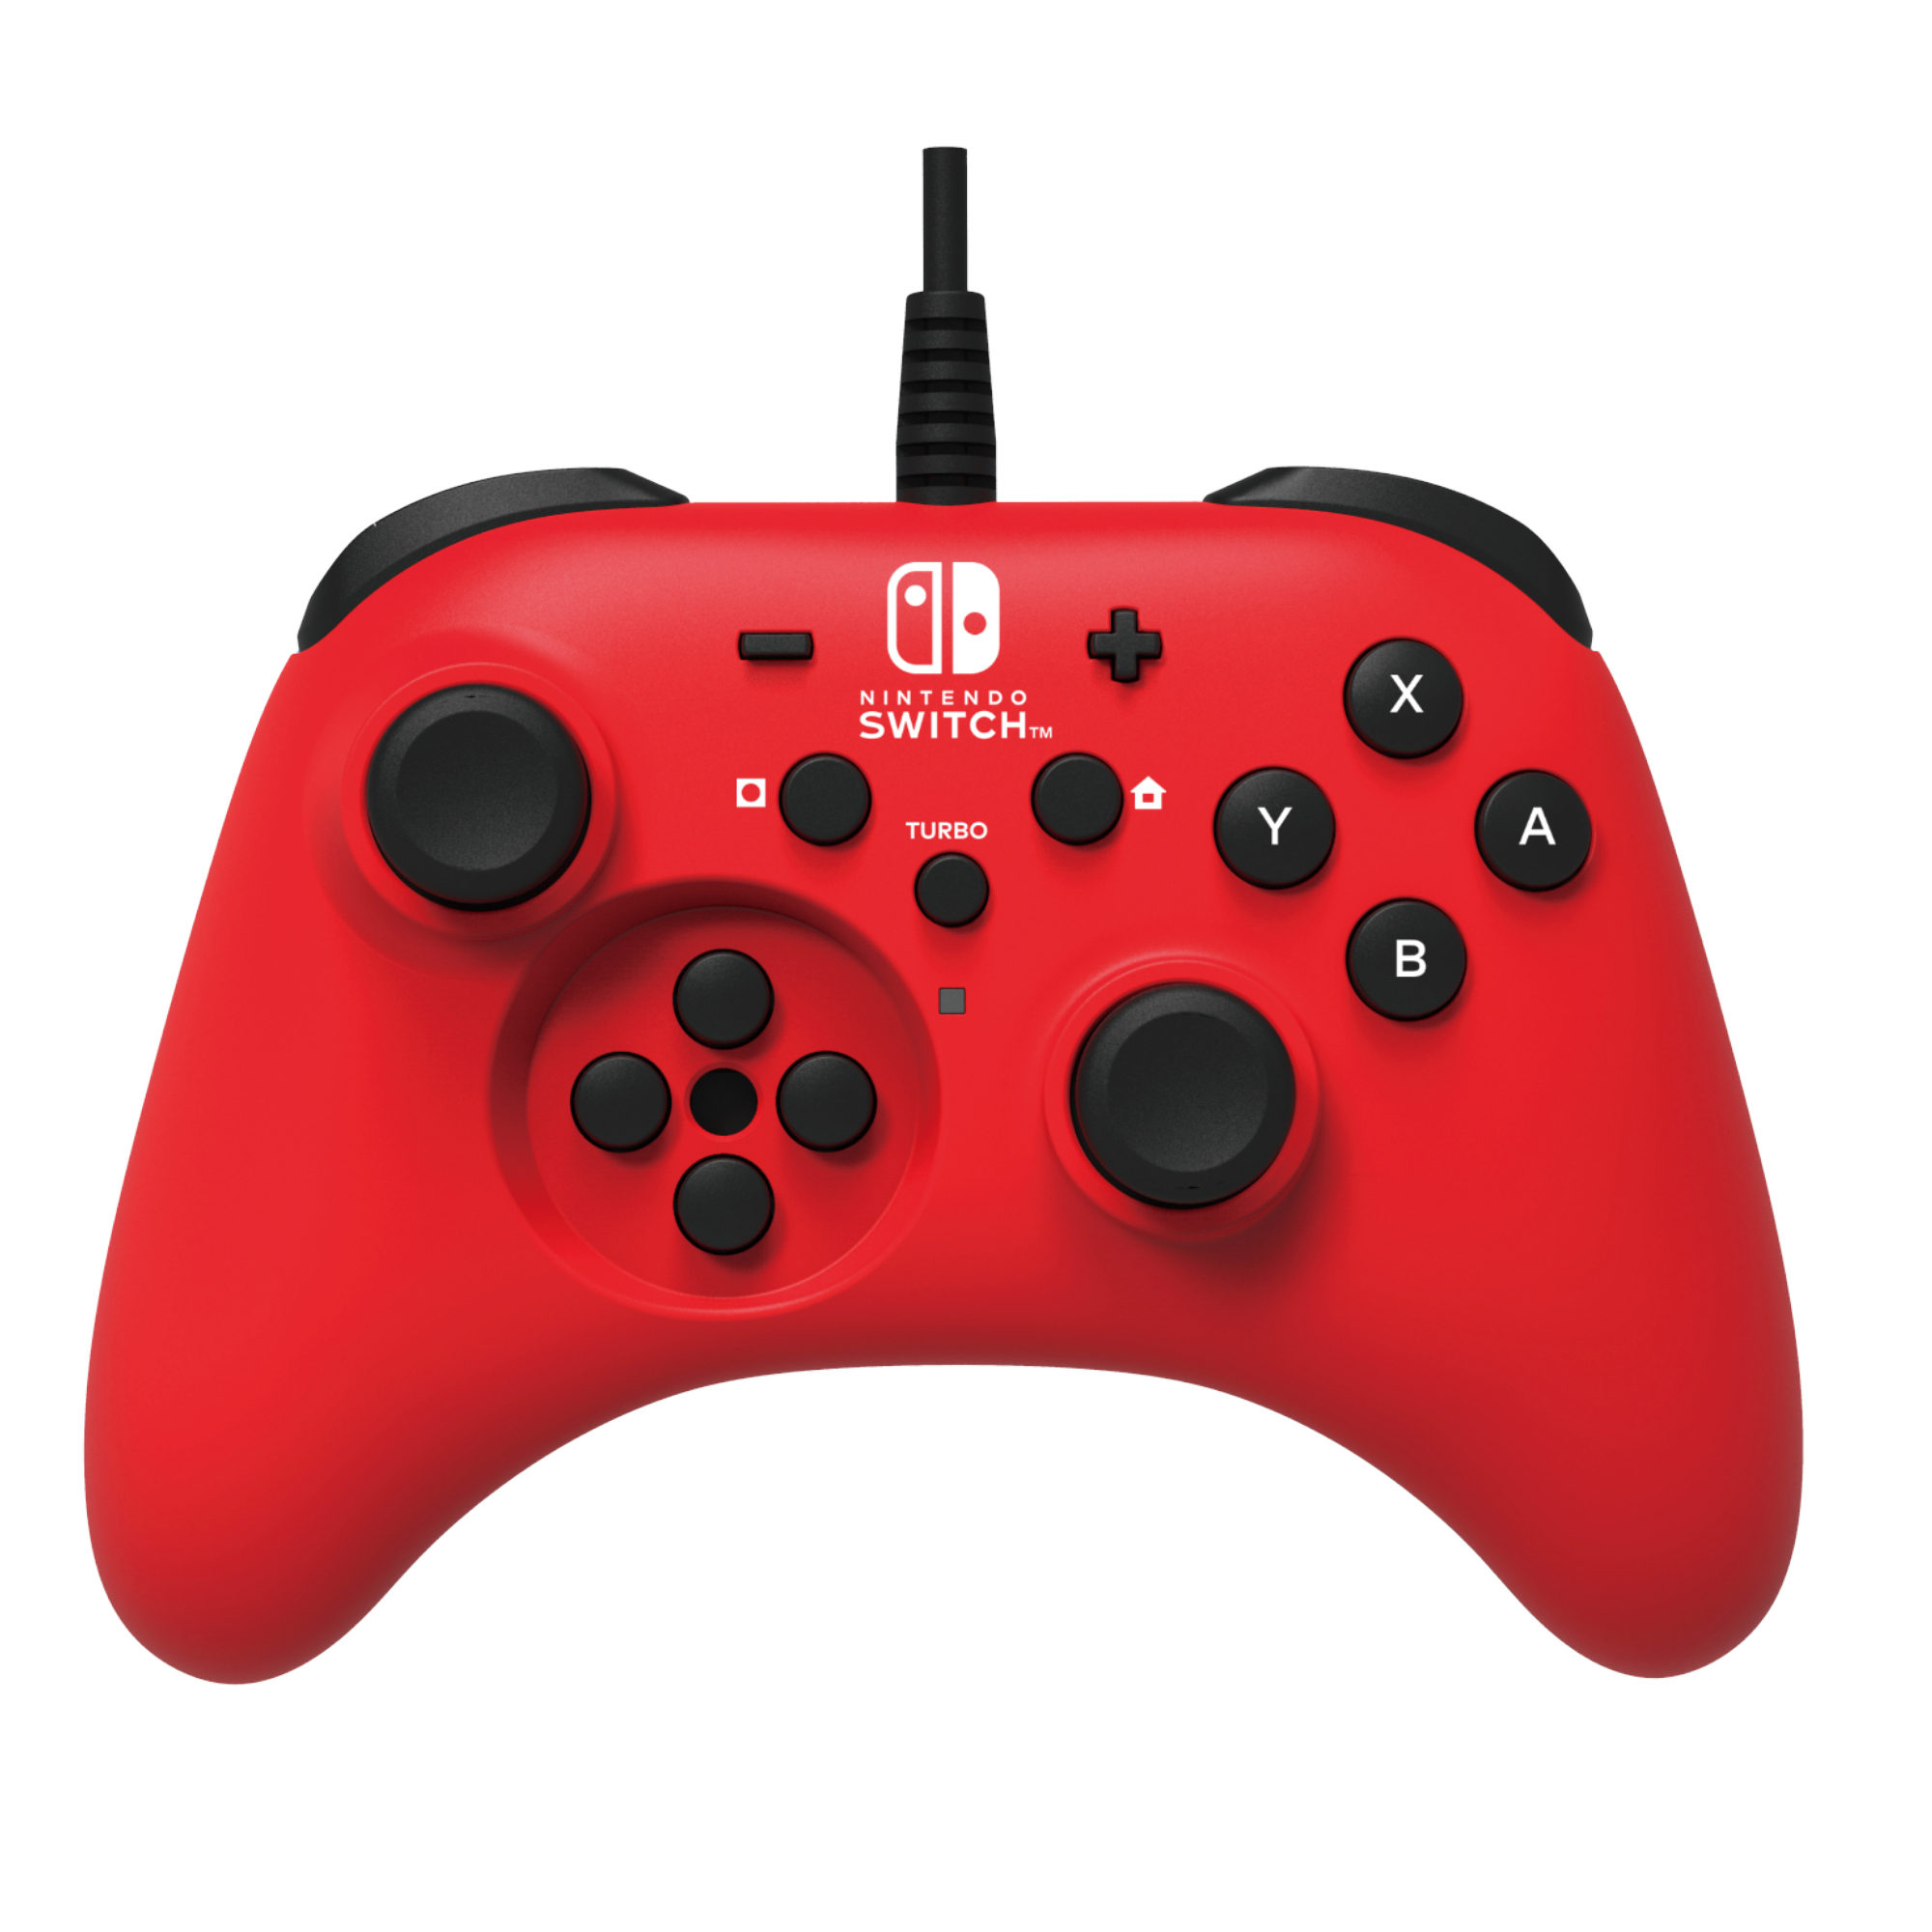 Hori - Red and Black, Nintendo Switch, Hori-Pad Video Game Controller - image 5 of 6